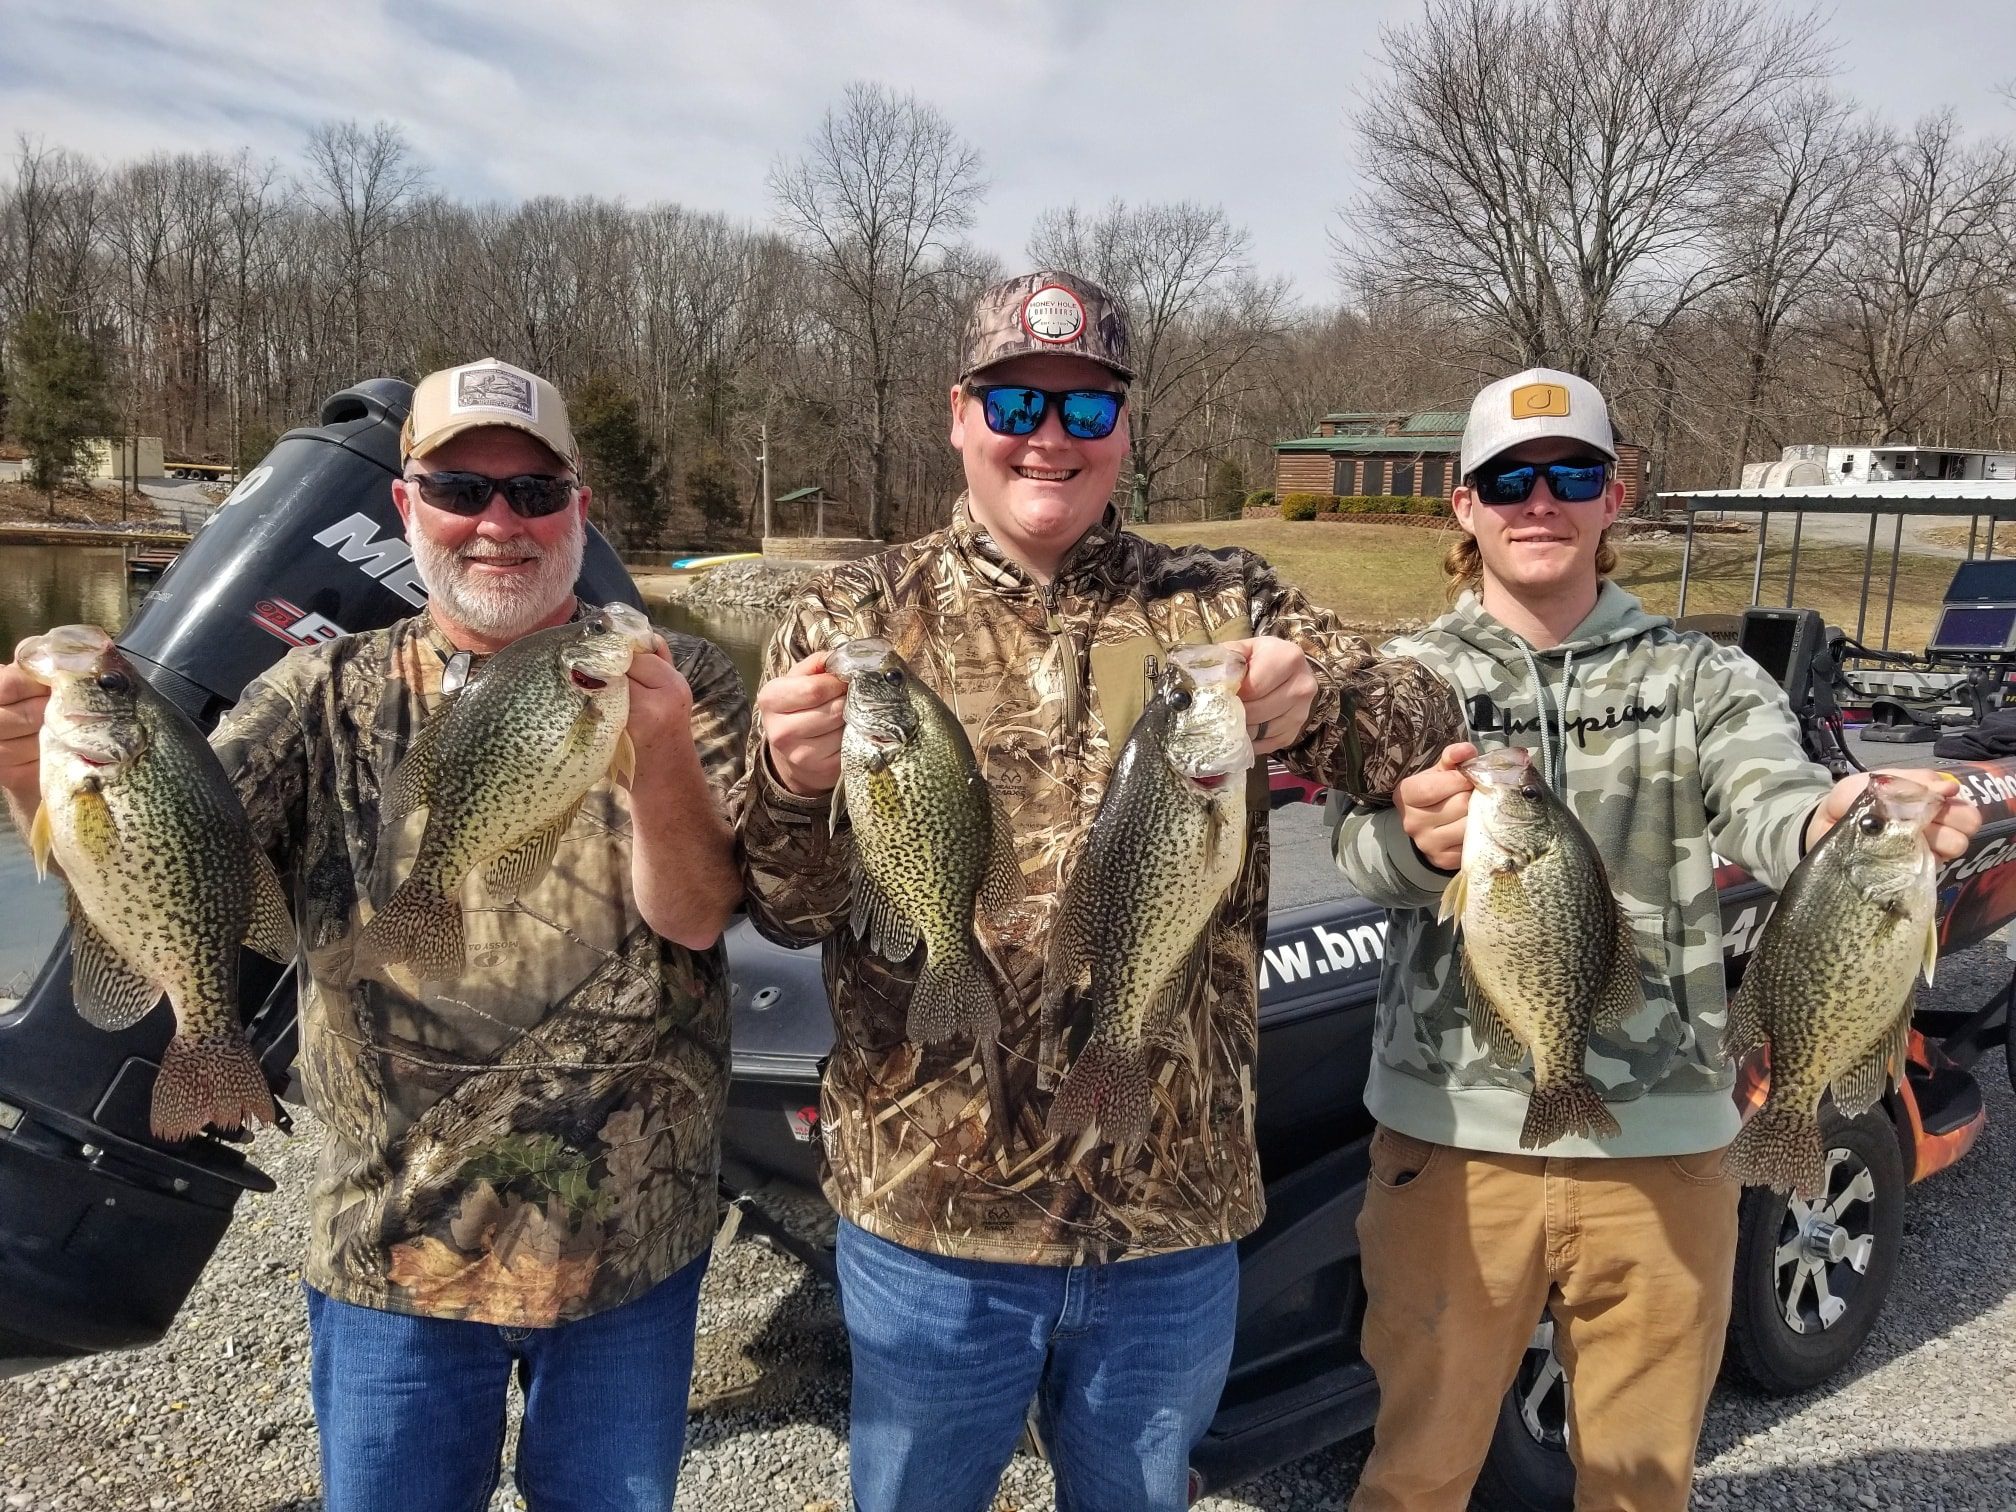 all-seasons-crappie-guide-service-group-lake-of-egypt-illinois